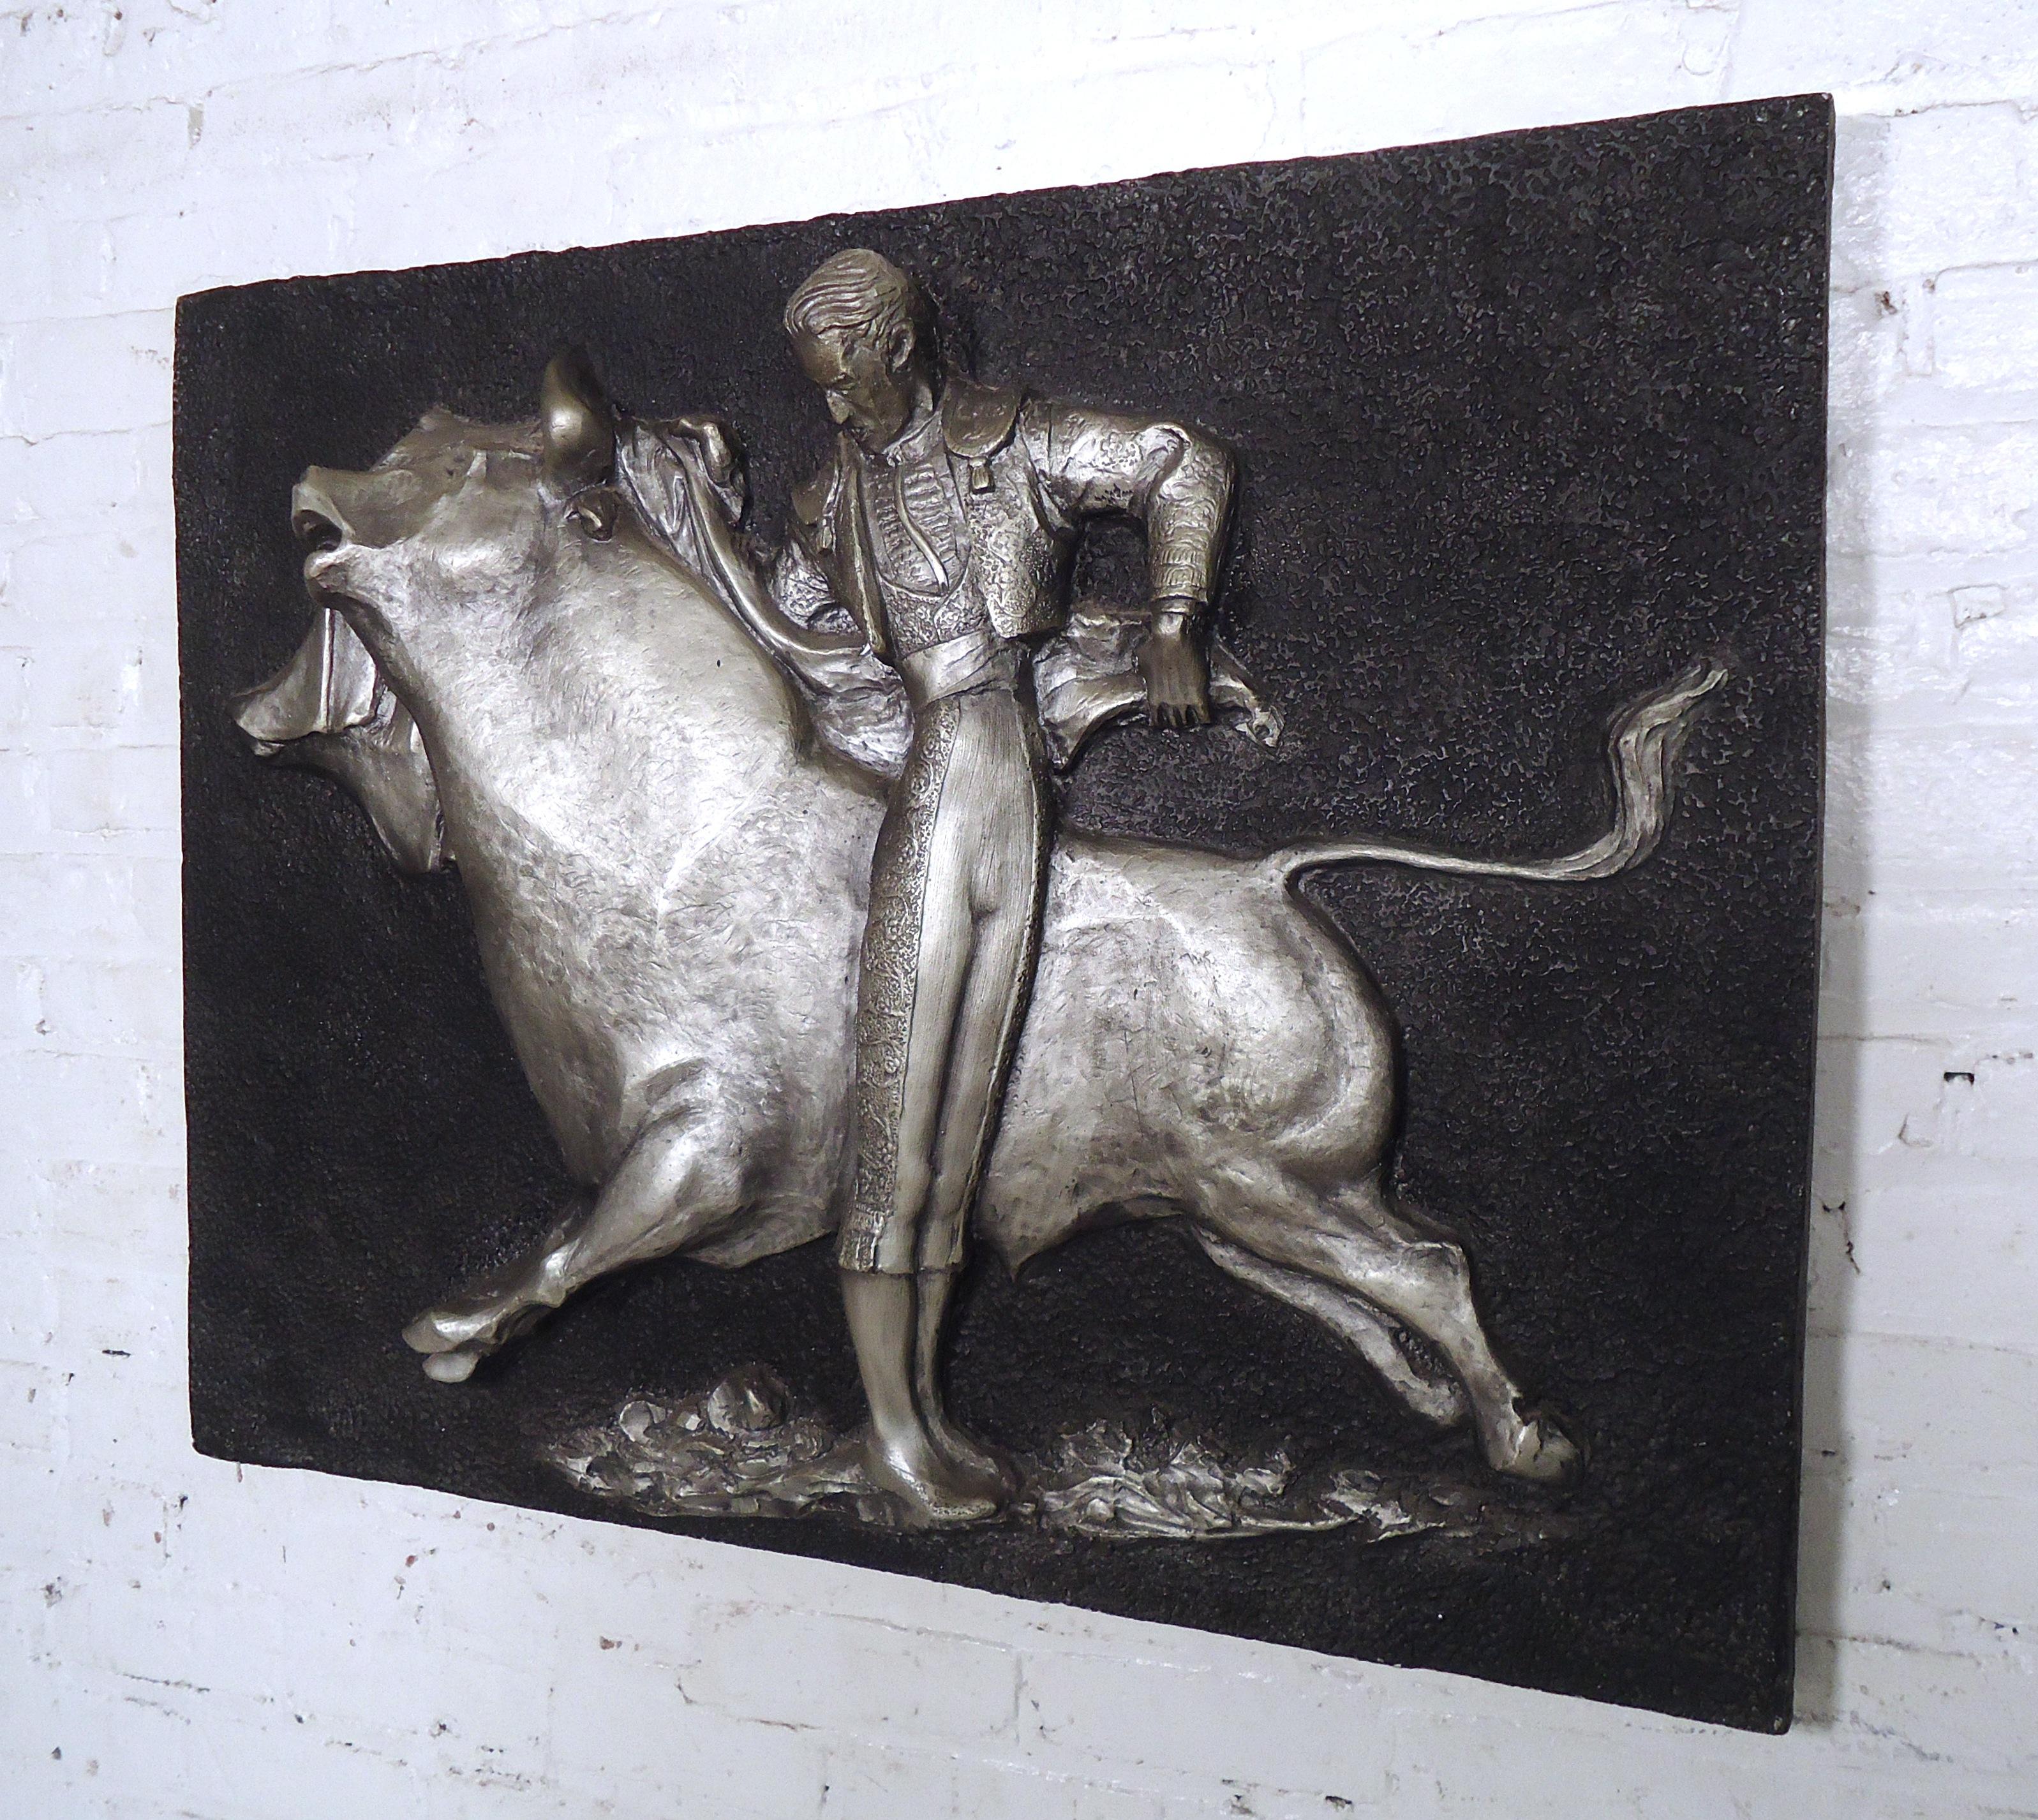 Fascinating molded fiberglass bull fight by renowned mid-century artist J. Segura. A three dimensional casting jumps off the wall and adds a vivid sense of adventure and excitement to any room. Blends traditional, retro, and brutalist aesthetics